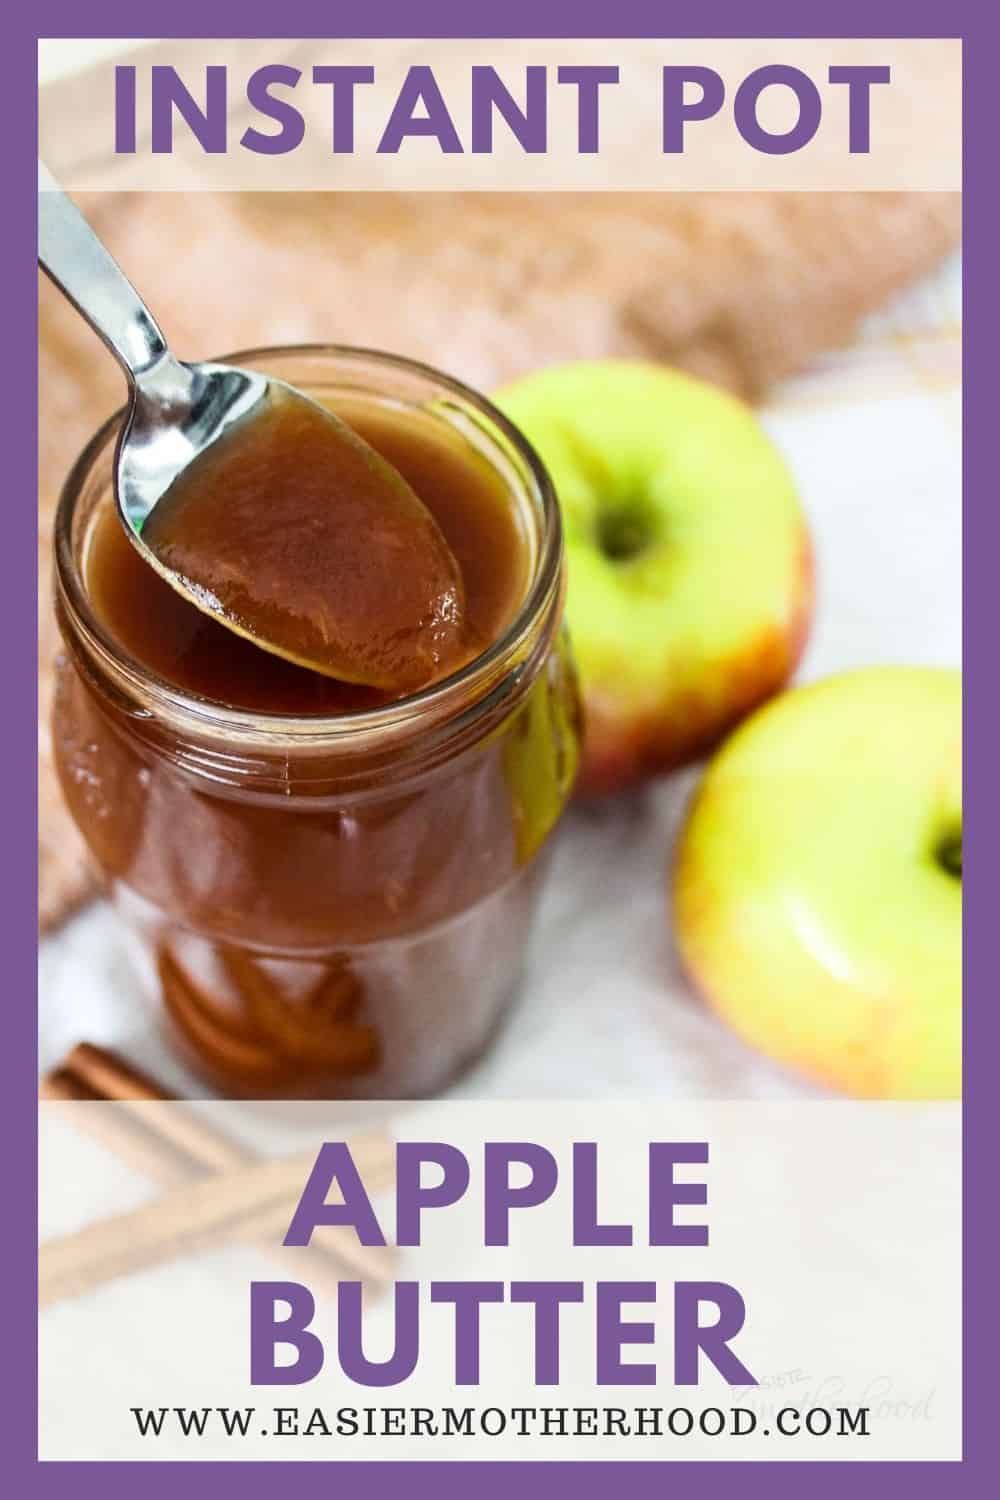 Apple butter being spooned out of jar with apples and cinnamon in background